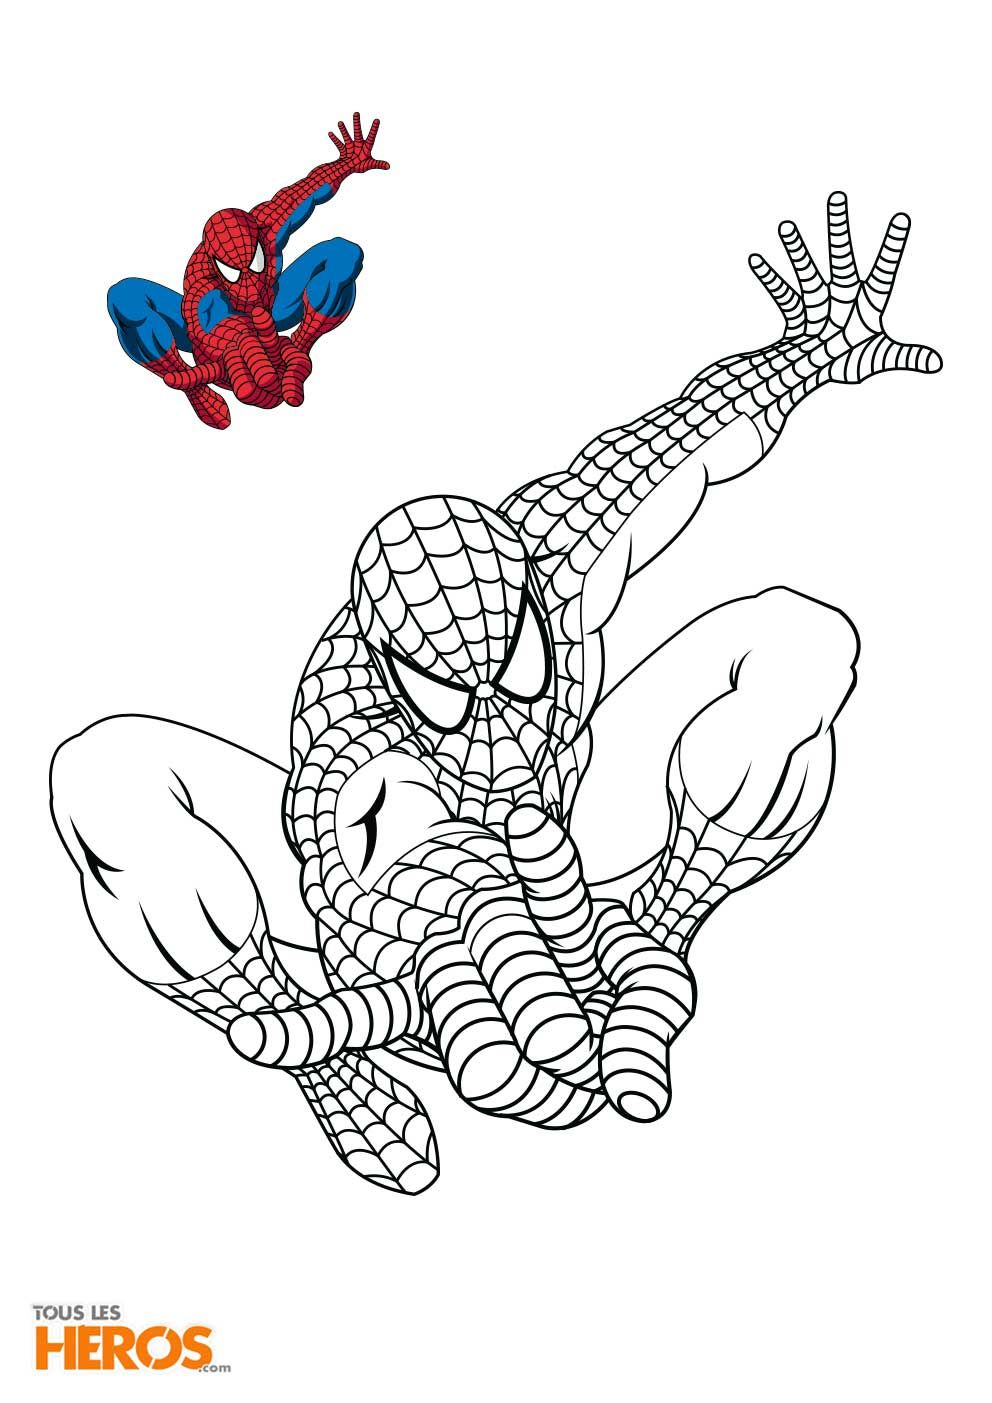 Lego Mega Spiderman Coloring Pages - Tripafethna tout Coloriage Spider Man 